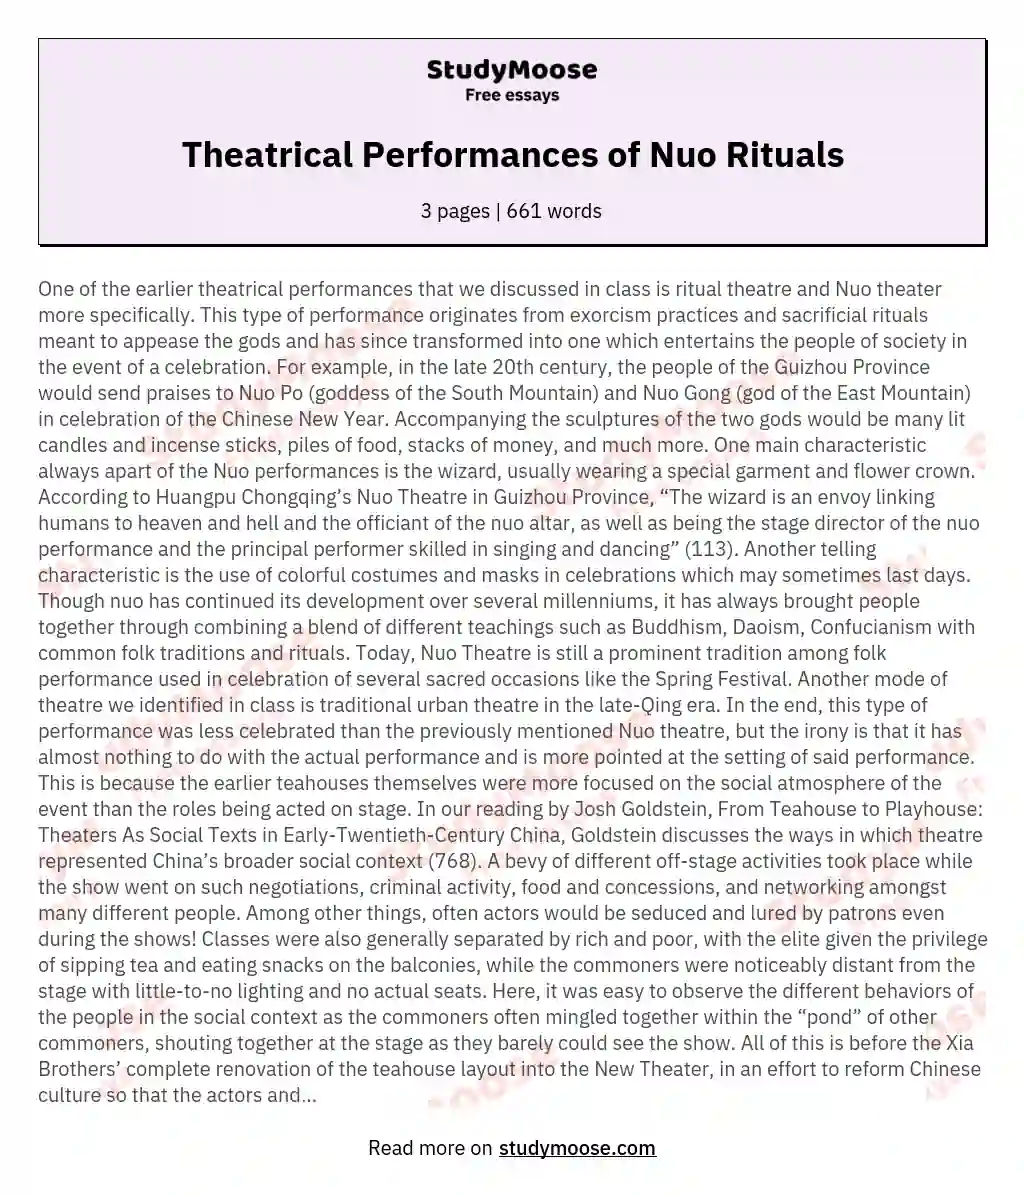 Theatrical Performances of Nuo Rituals essay